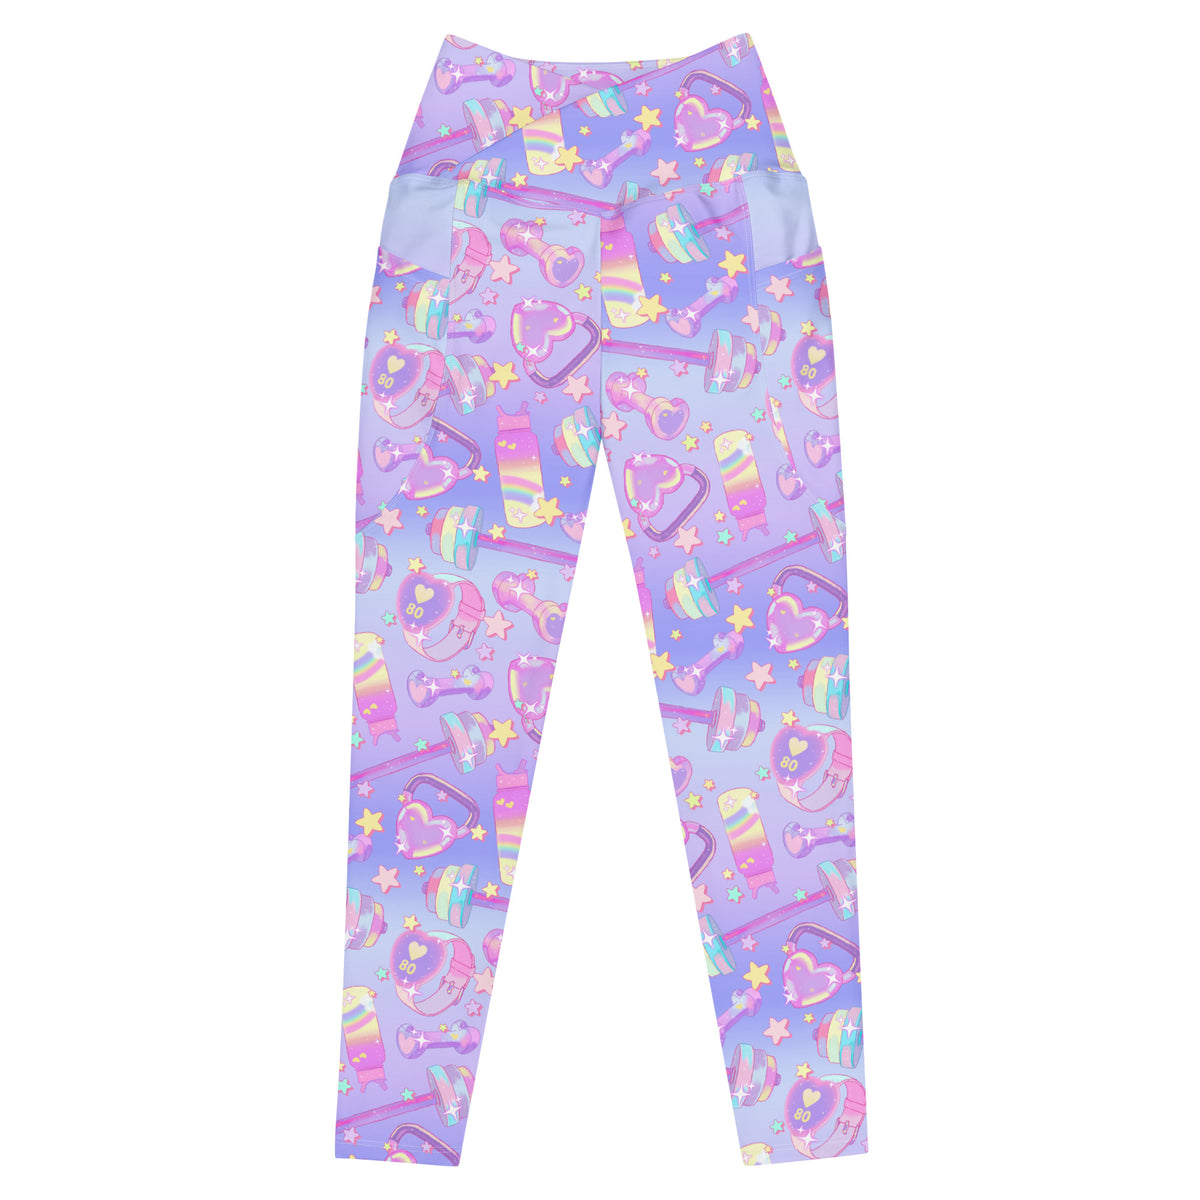 Design awesome leggings,capris and hoodies for printful and pillow profit  by Studio141